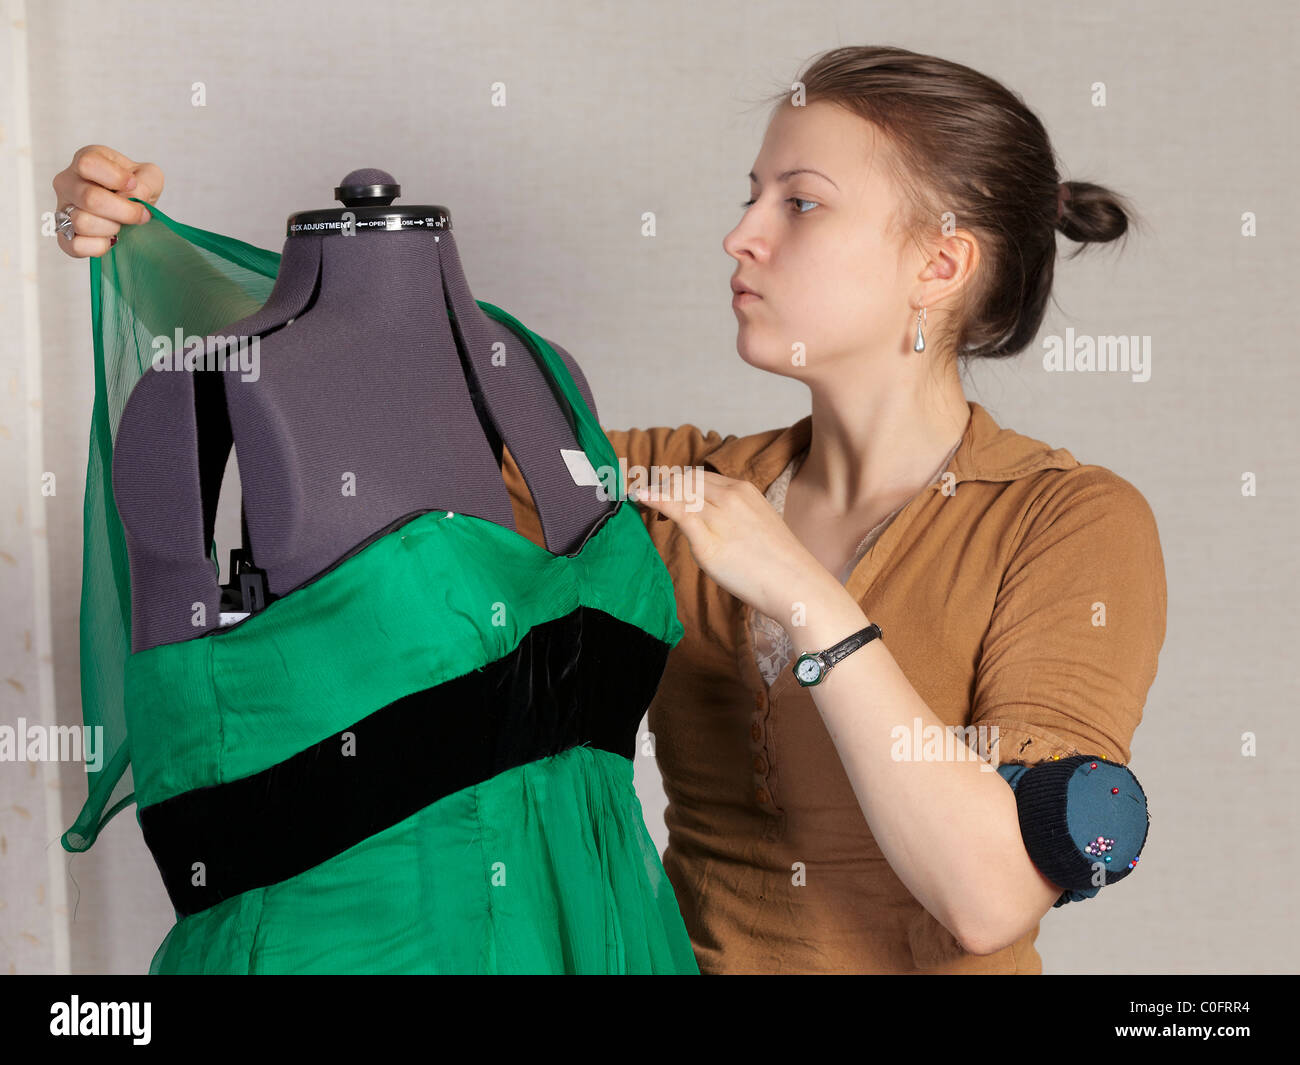 A young seamstress adjusts the green evening dress on the dummy. Stock Photo